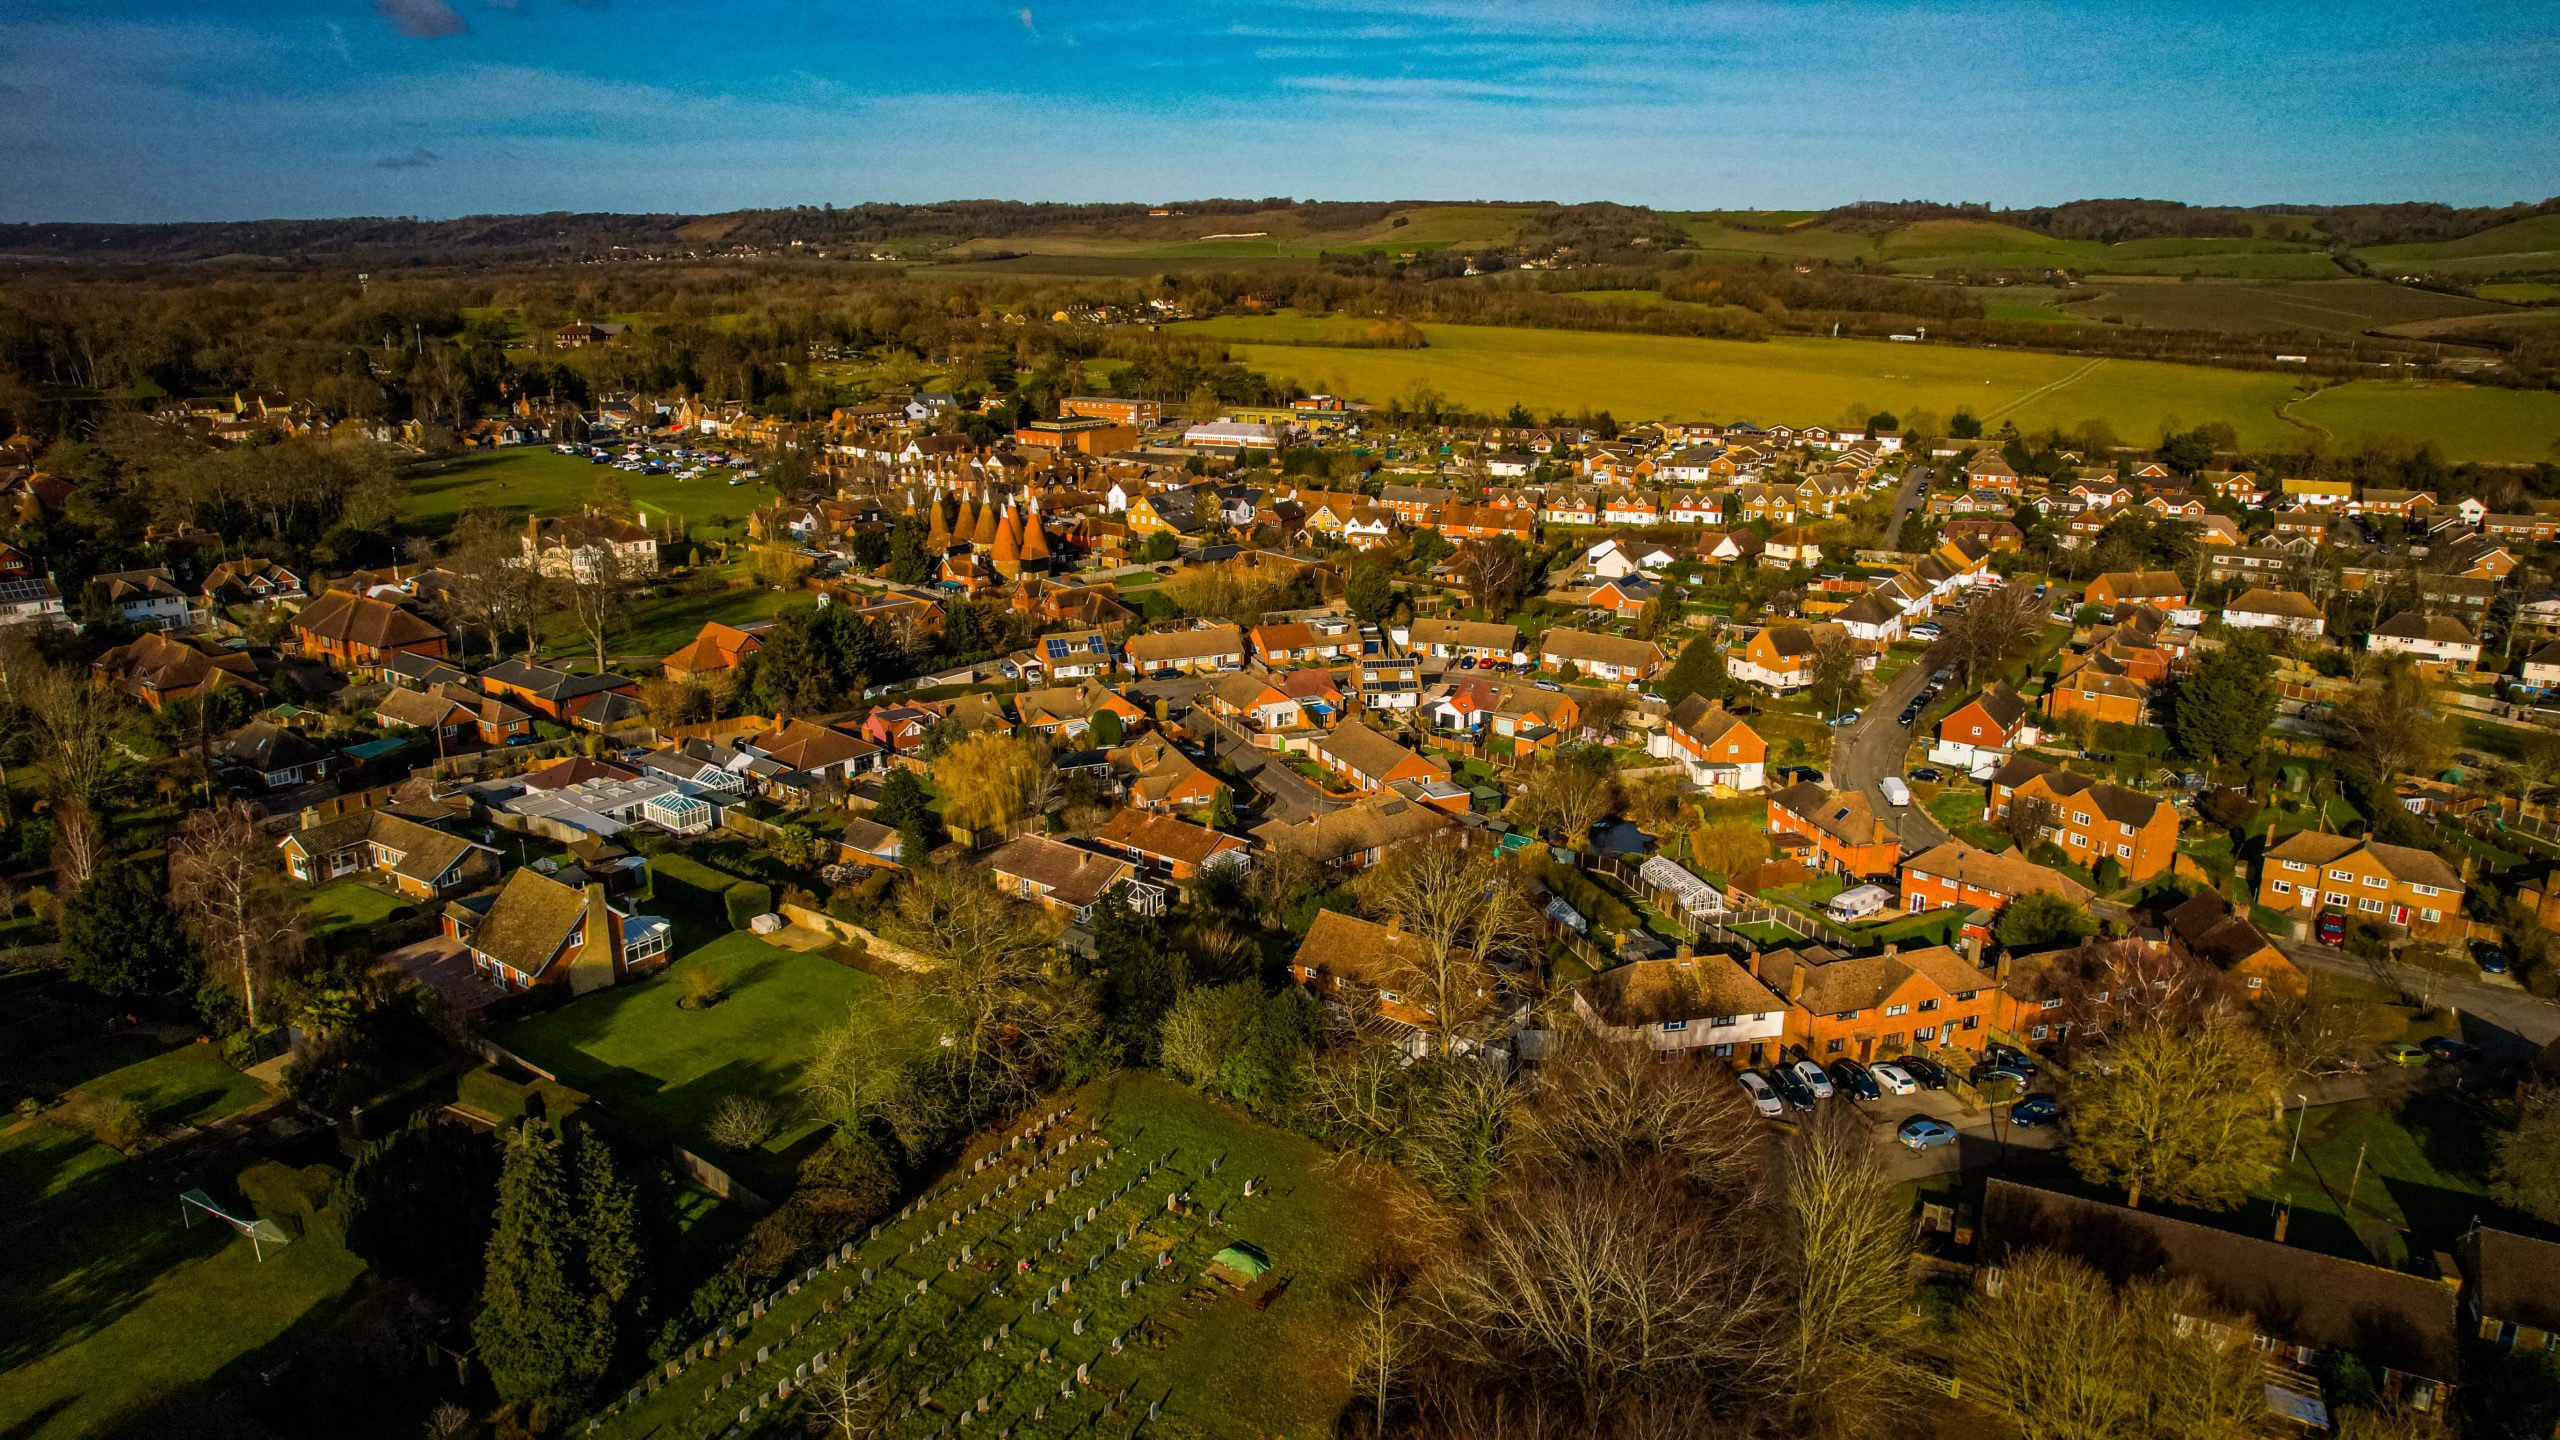 Aerial of Bearsted in the sun, the grass is green ad the buildings orange